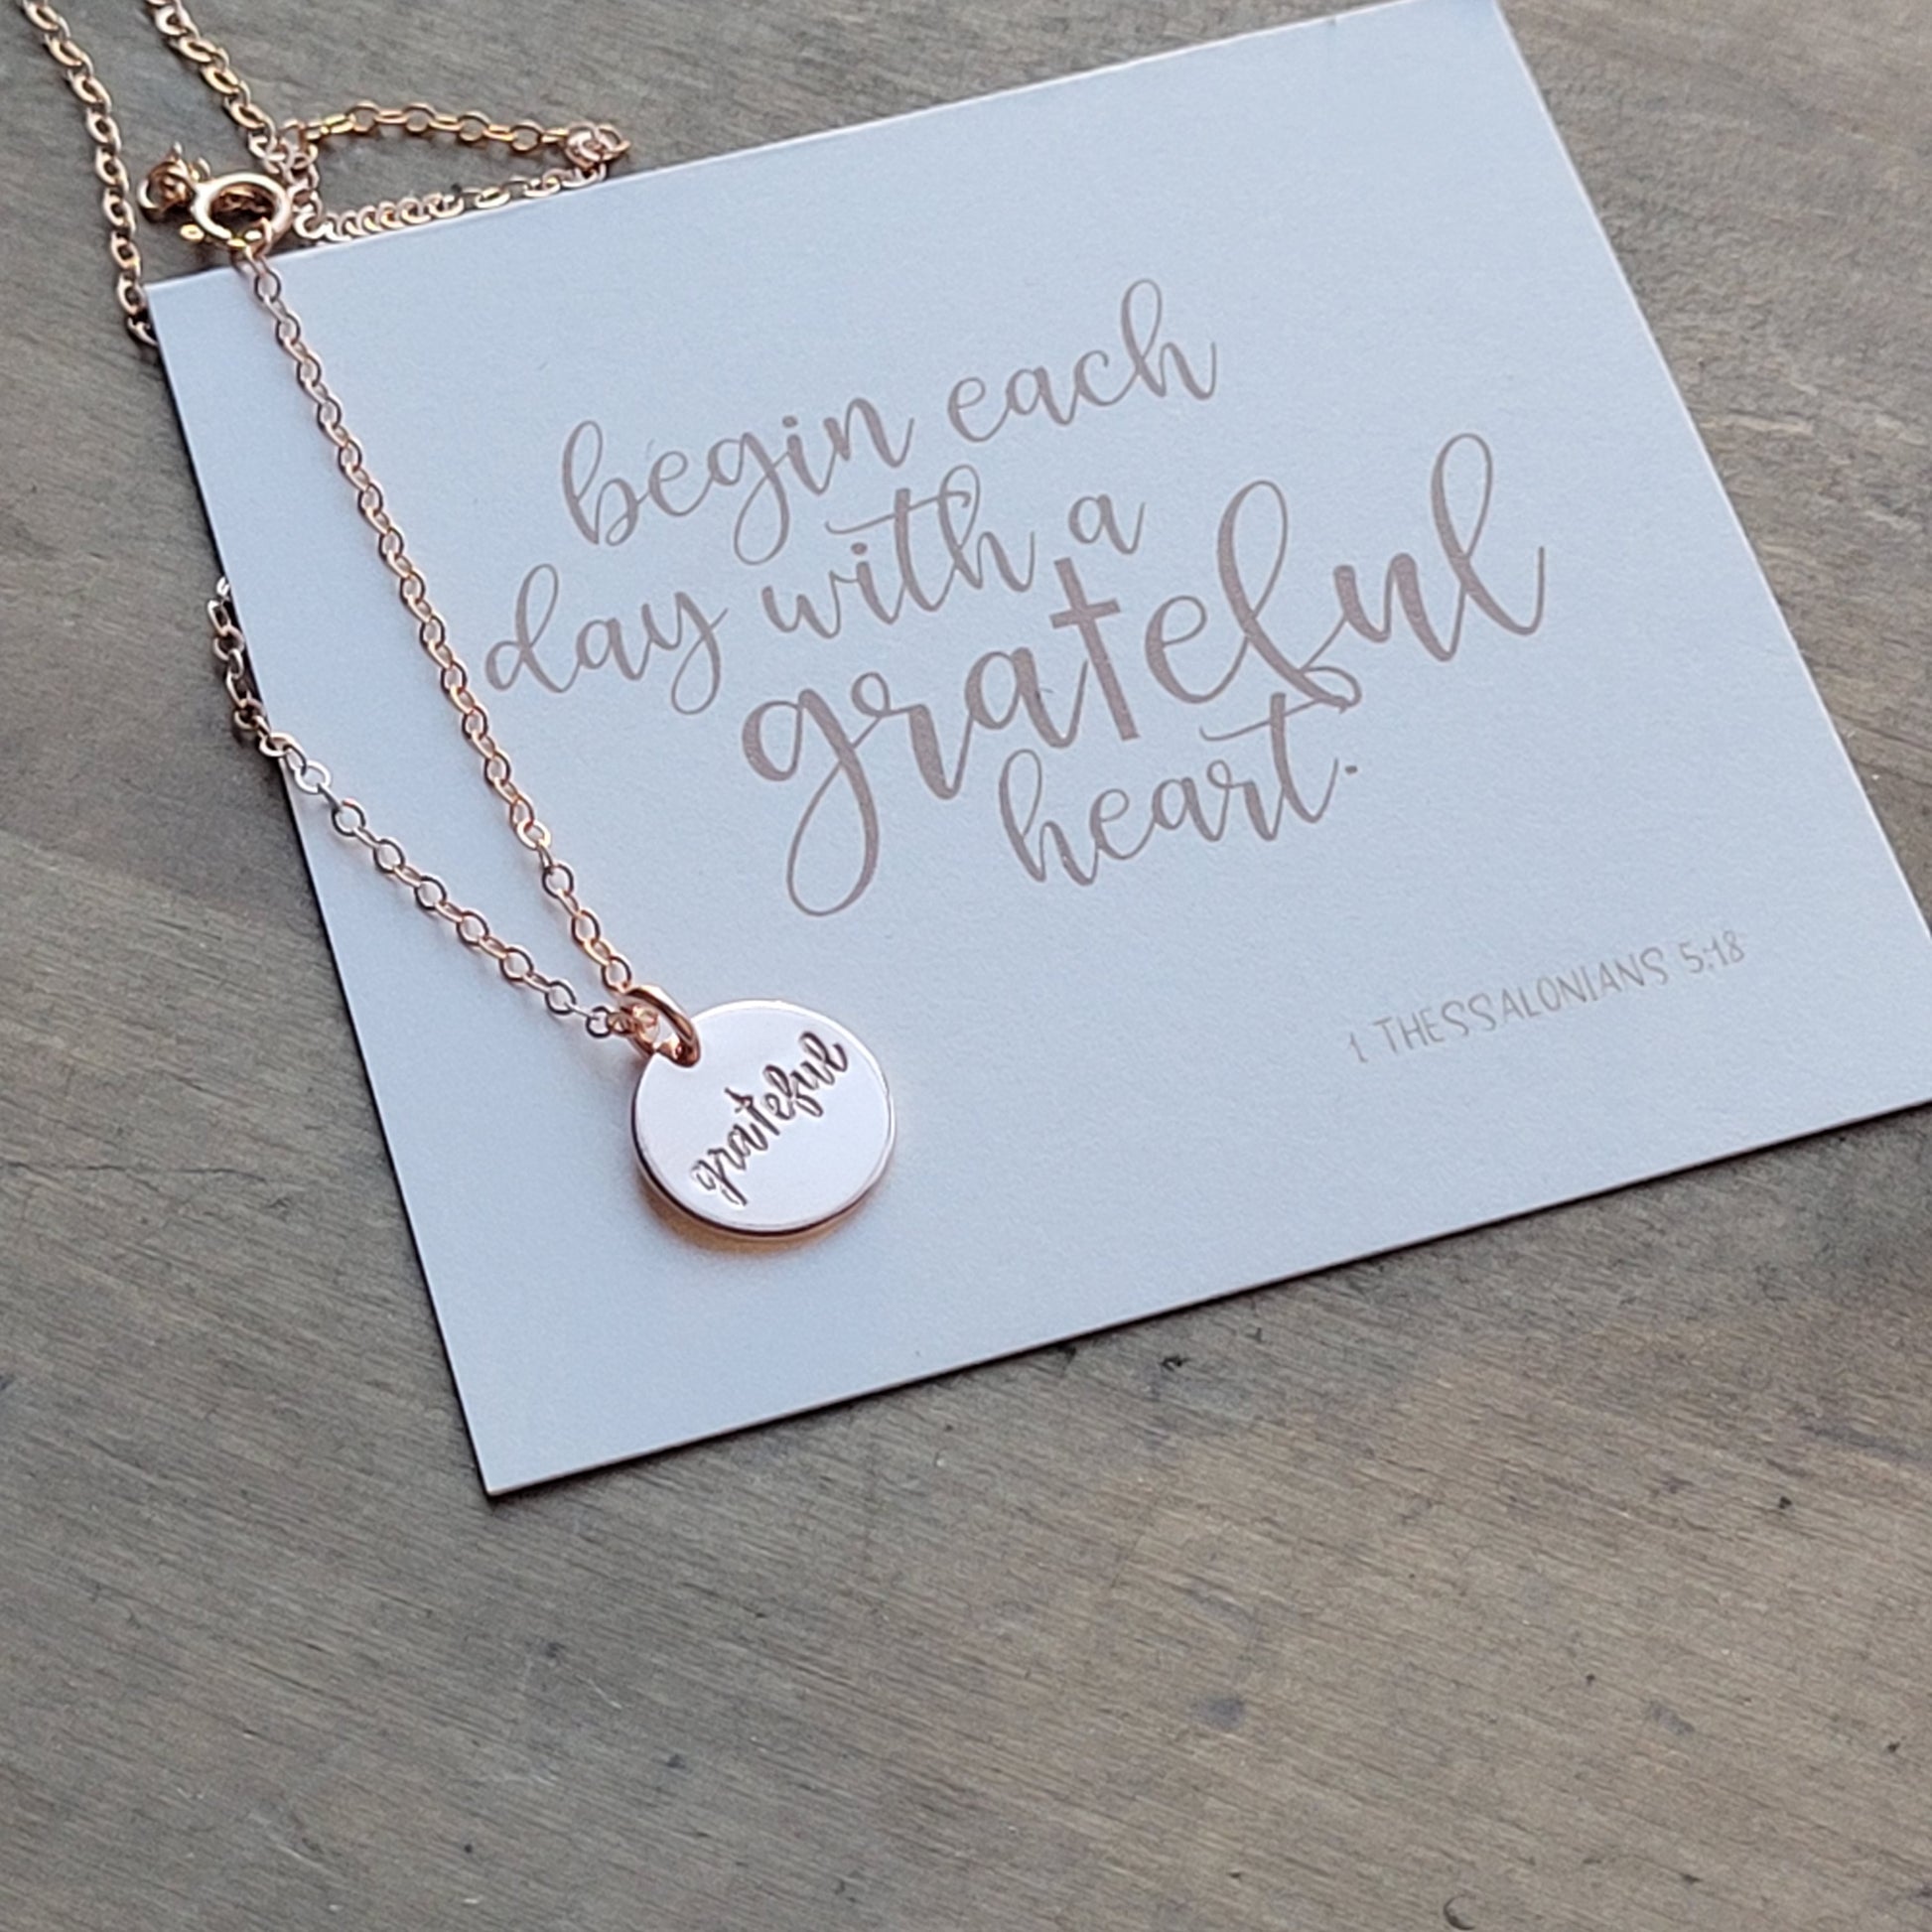 Begin Each Day With a Grateful Heart Necklace and display card.  Thessalonians 5:18